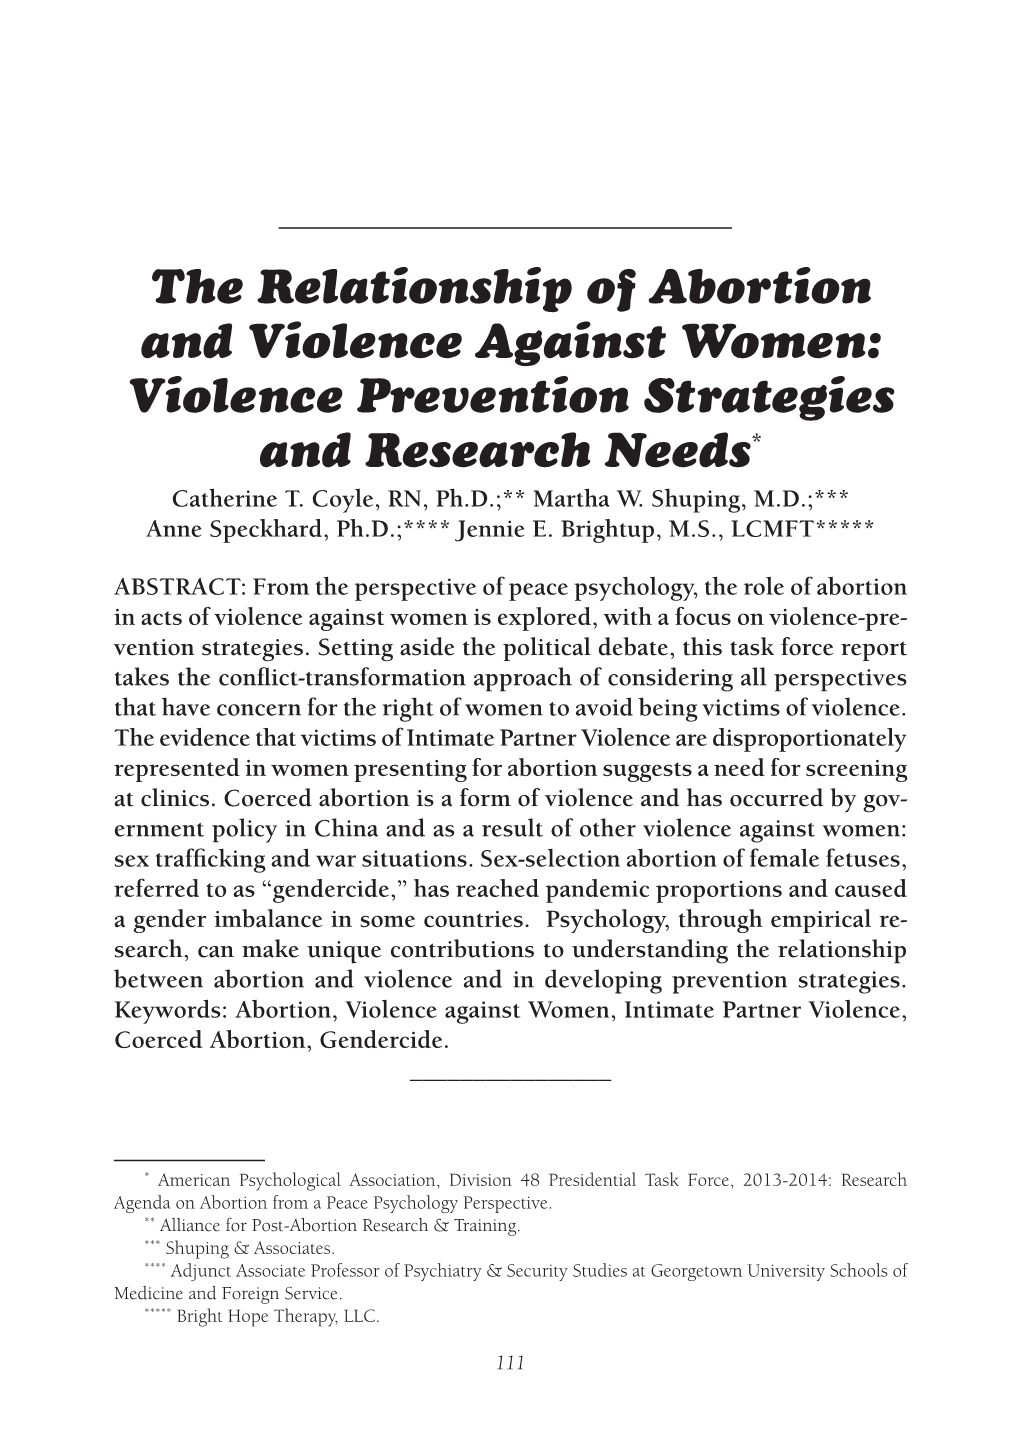 The Relationship of Abortion and Violence Against Women: Violence Prevention Strategies and Research Needs* Catherine T